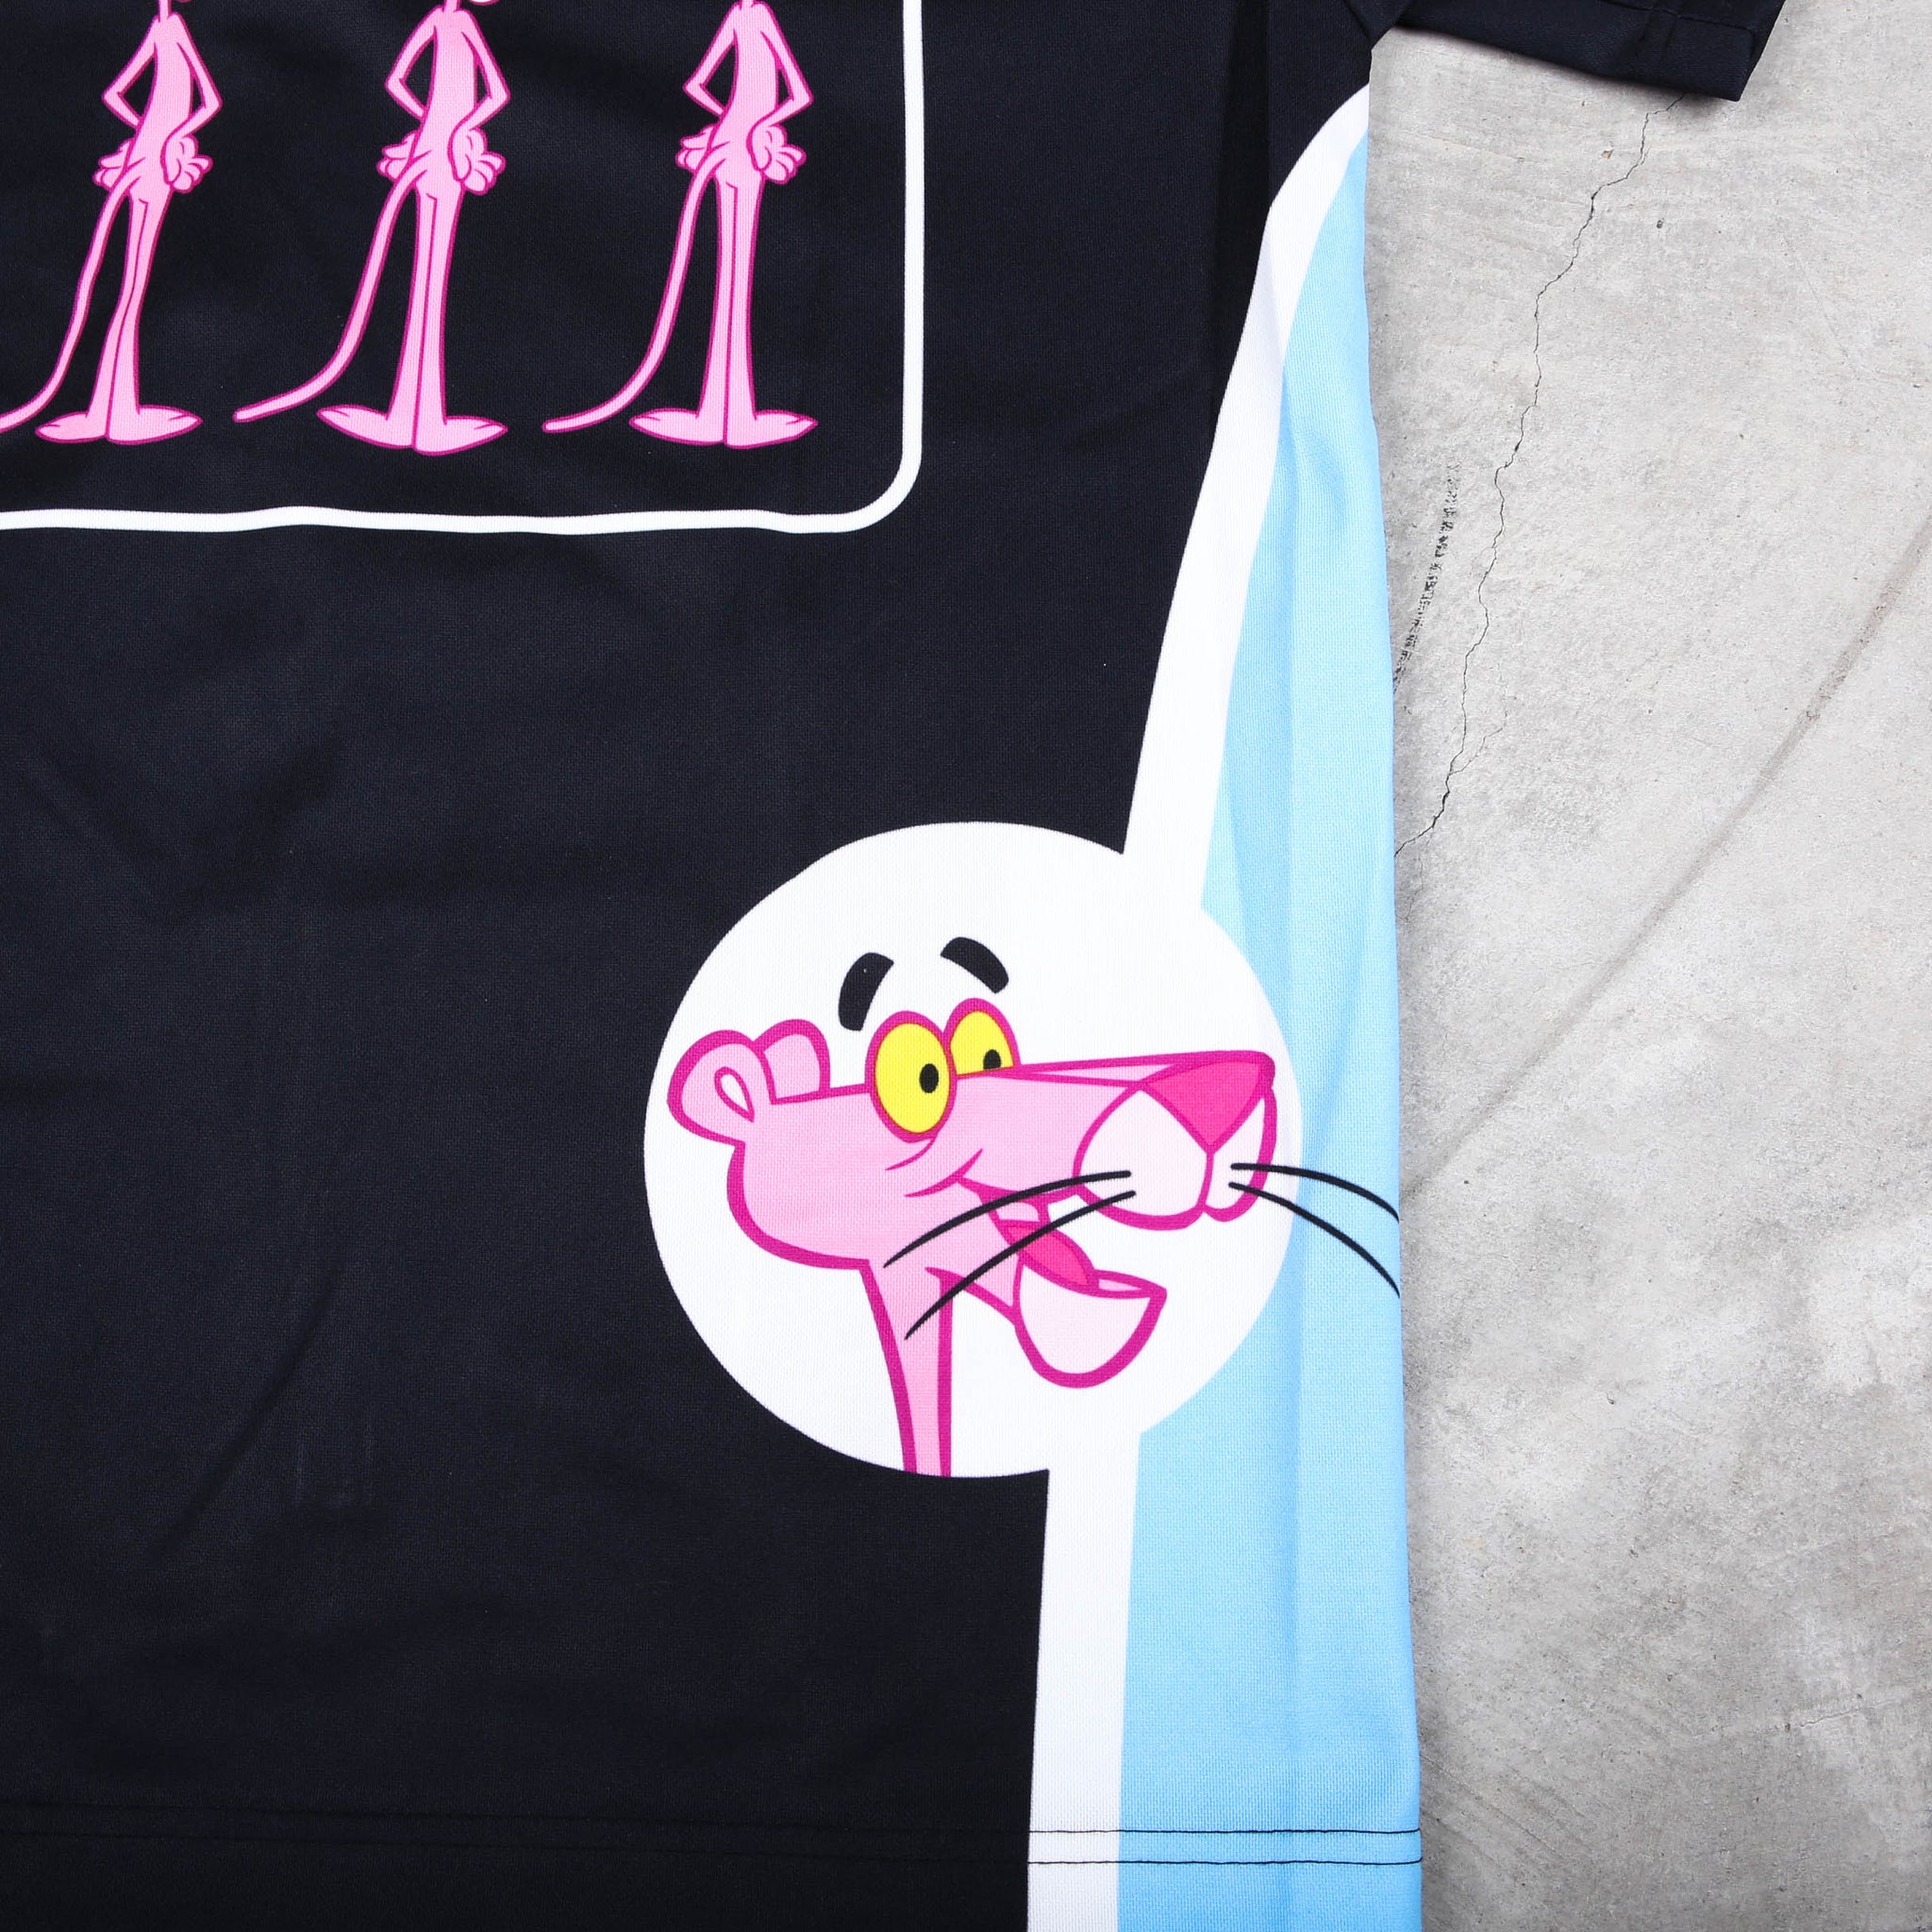 Comme des Garçons Homme Plus SS2005 Pink Panther Cycling Jersey